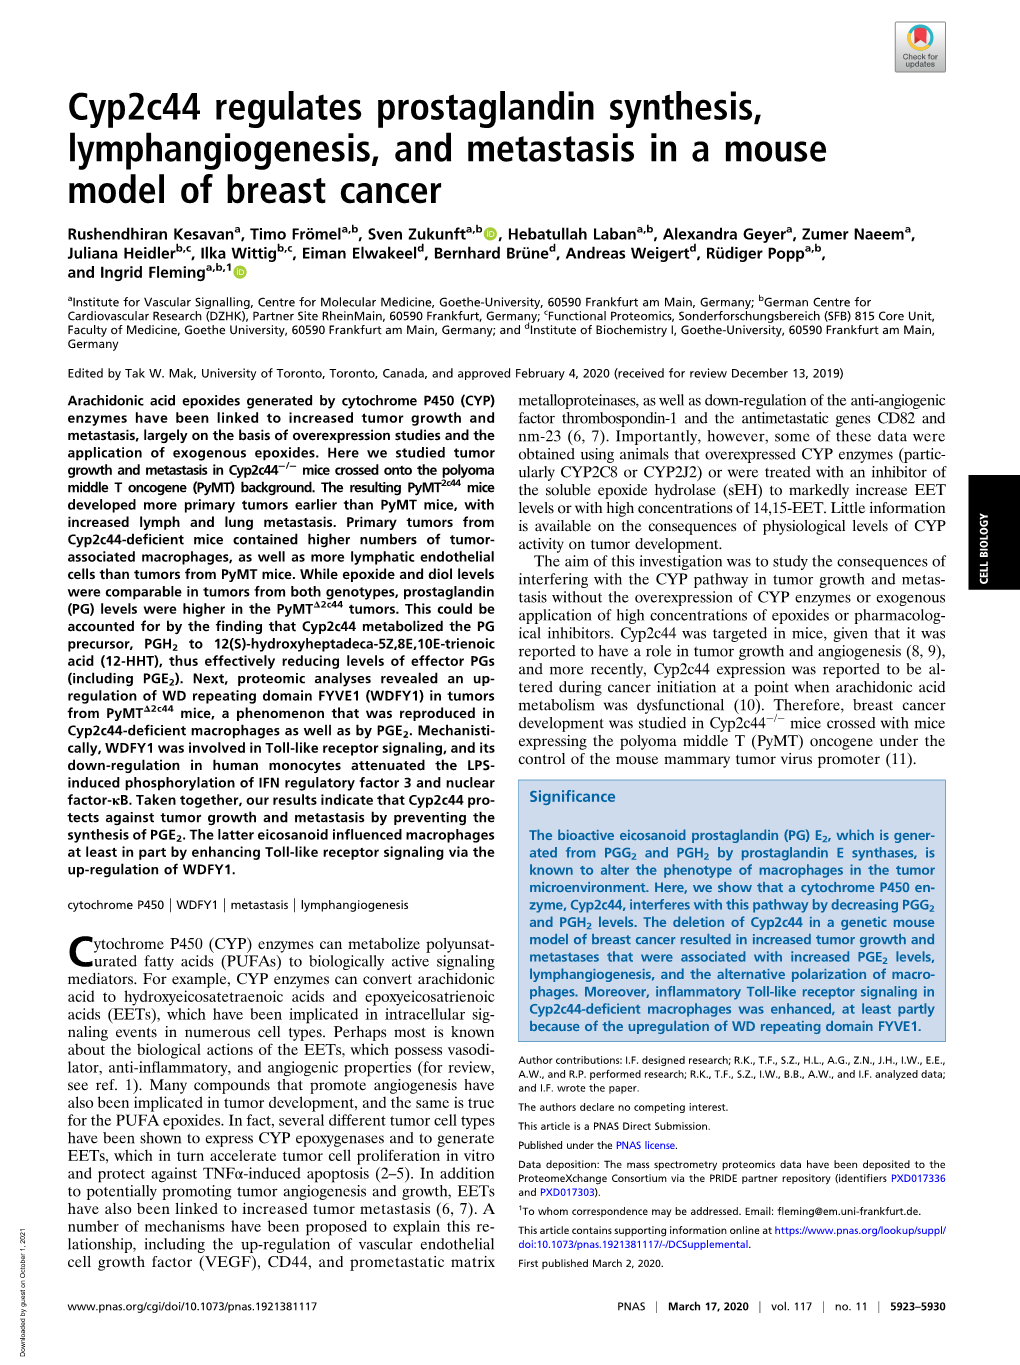 Cyp2c44 Regulates Prostaglandin Synthesis, Lymphangiogenesis, and Metastasis in a Mouse Model of Breast Cancer